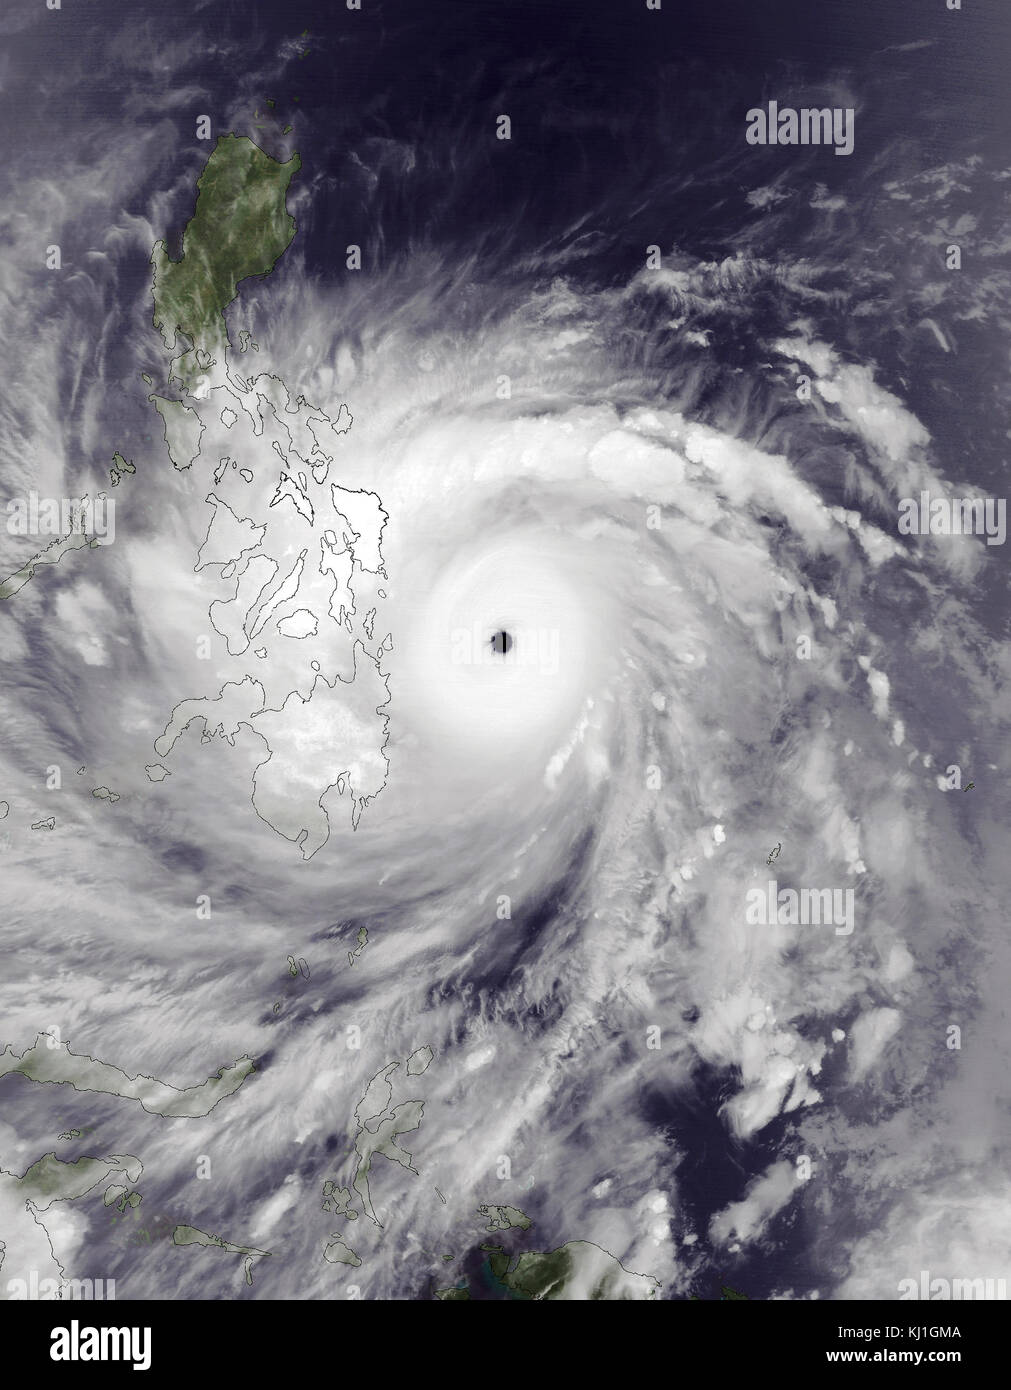 Typhoon Haiyan, known as Super Typhoon Yolanda in the Philippines, was one of the most intense tropical cyclones on record, which devastated portions of Southeast Asia, particularly the Philippines, on November 8, 2013. It is the deadliest Philippine typhoon on record, killing at least 6,300 people in that country alone Stock Photo